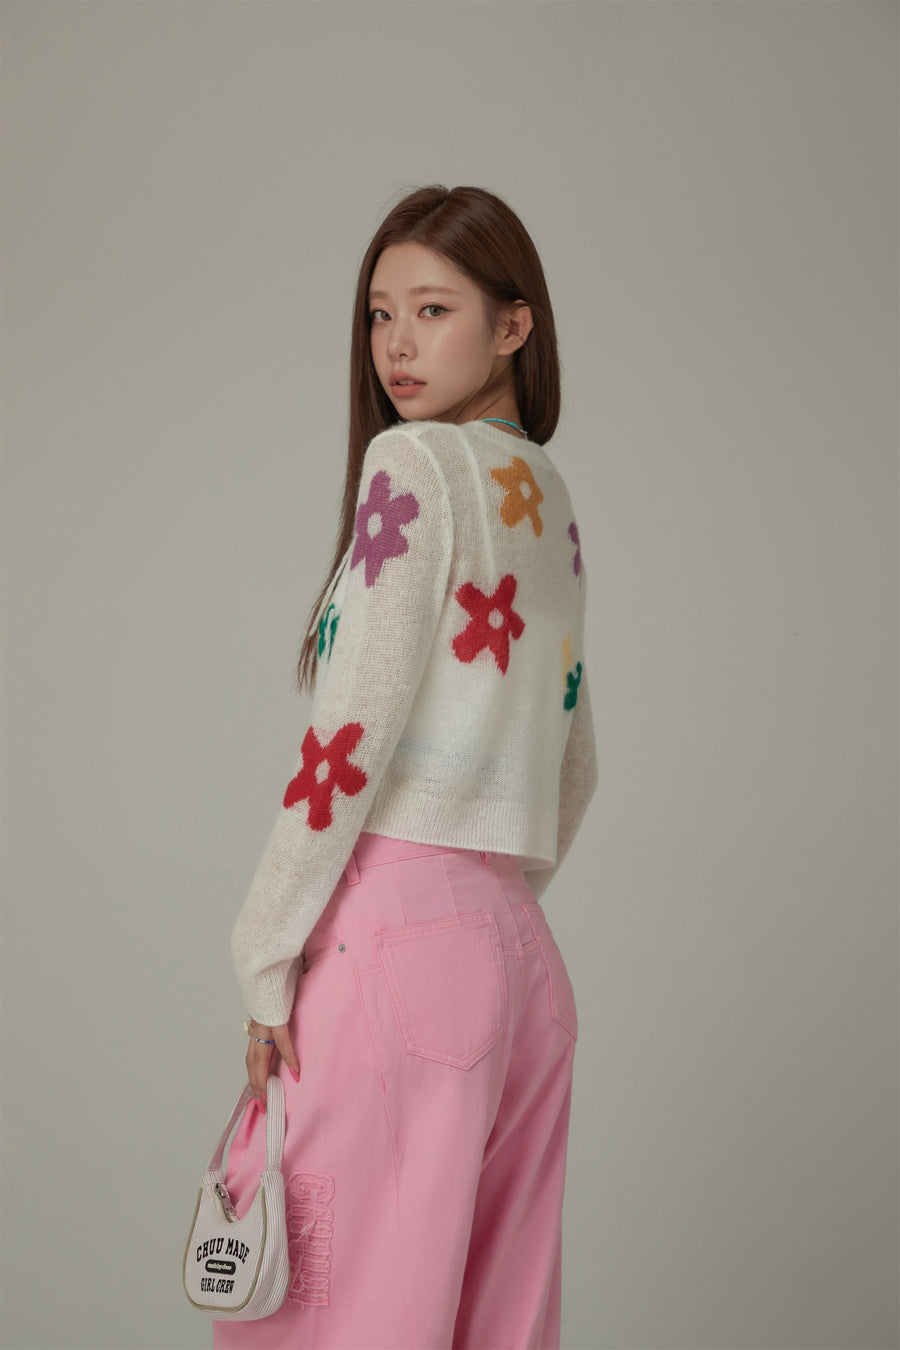 Colorful Flowers Crop Knit Sweater